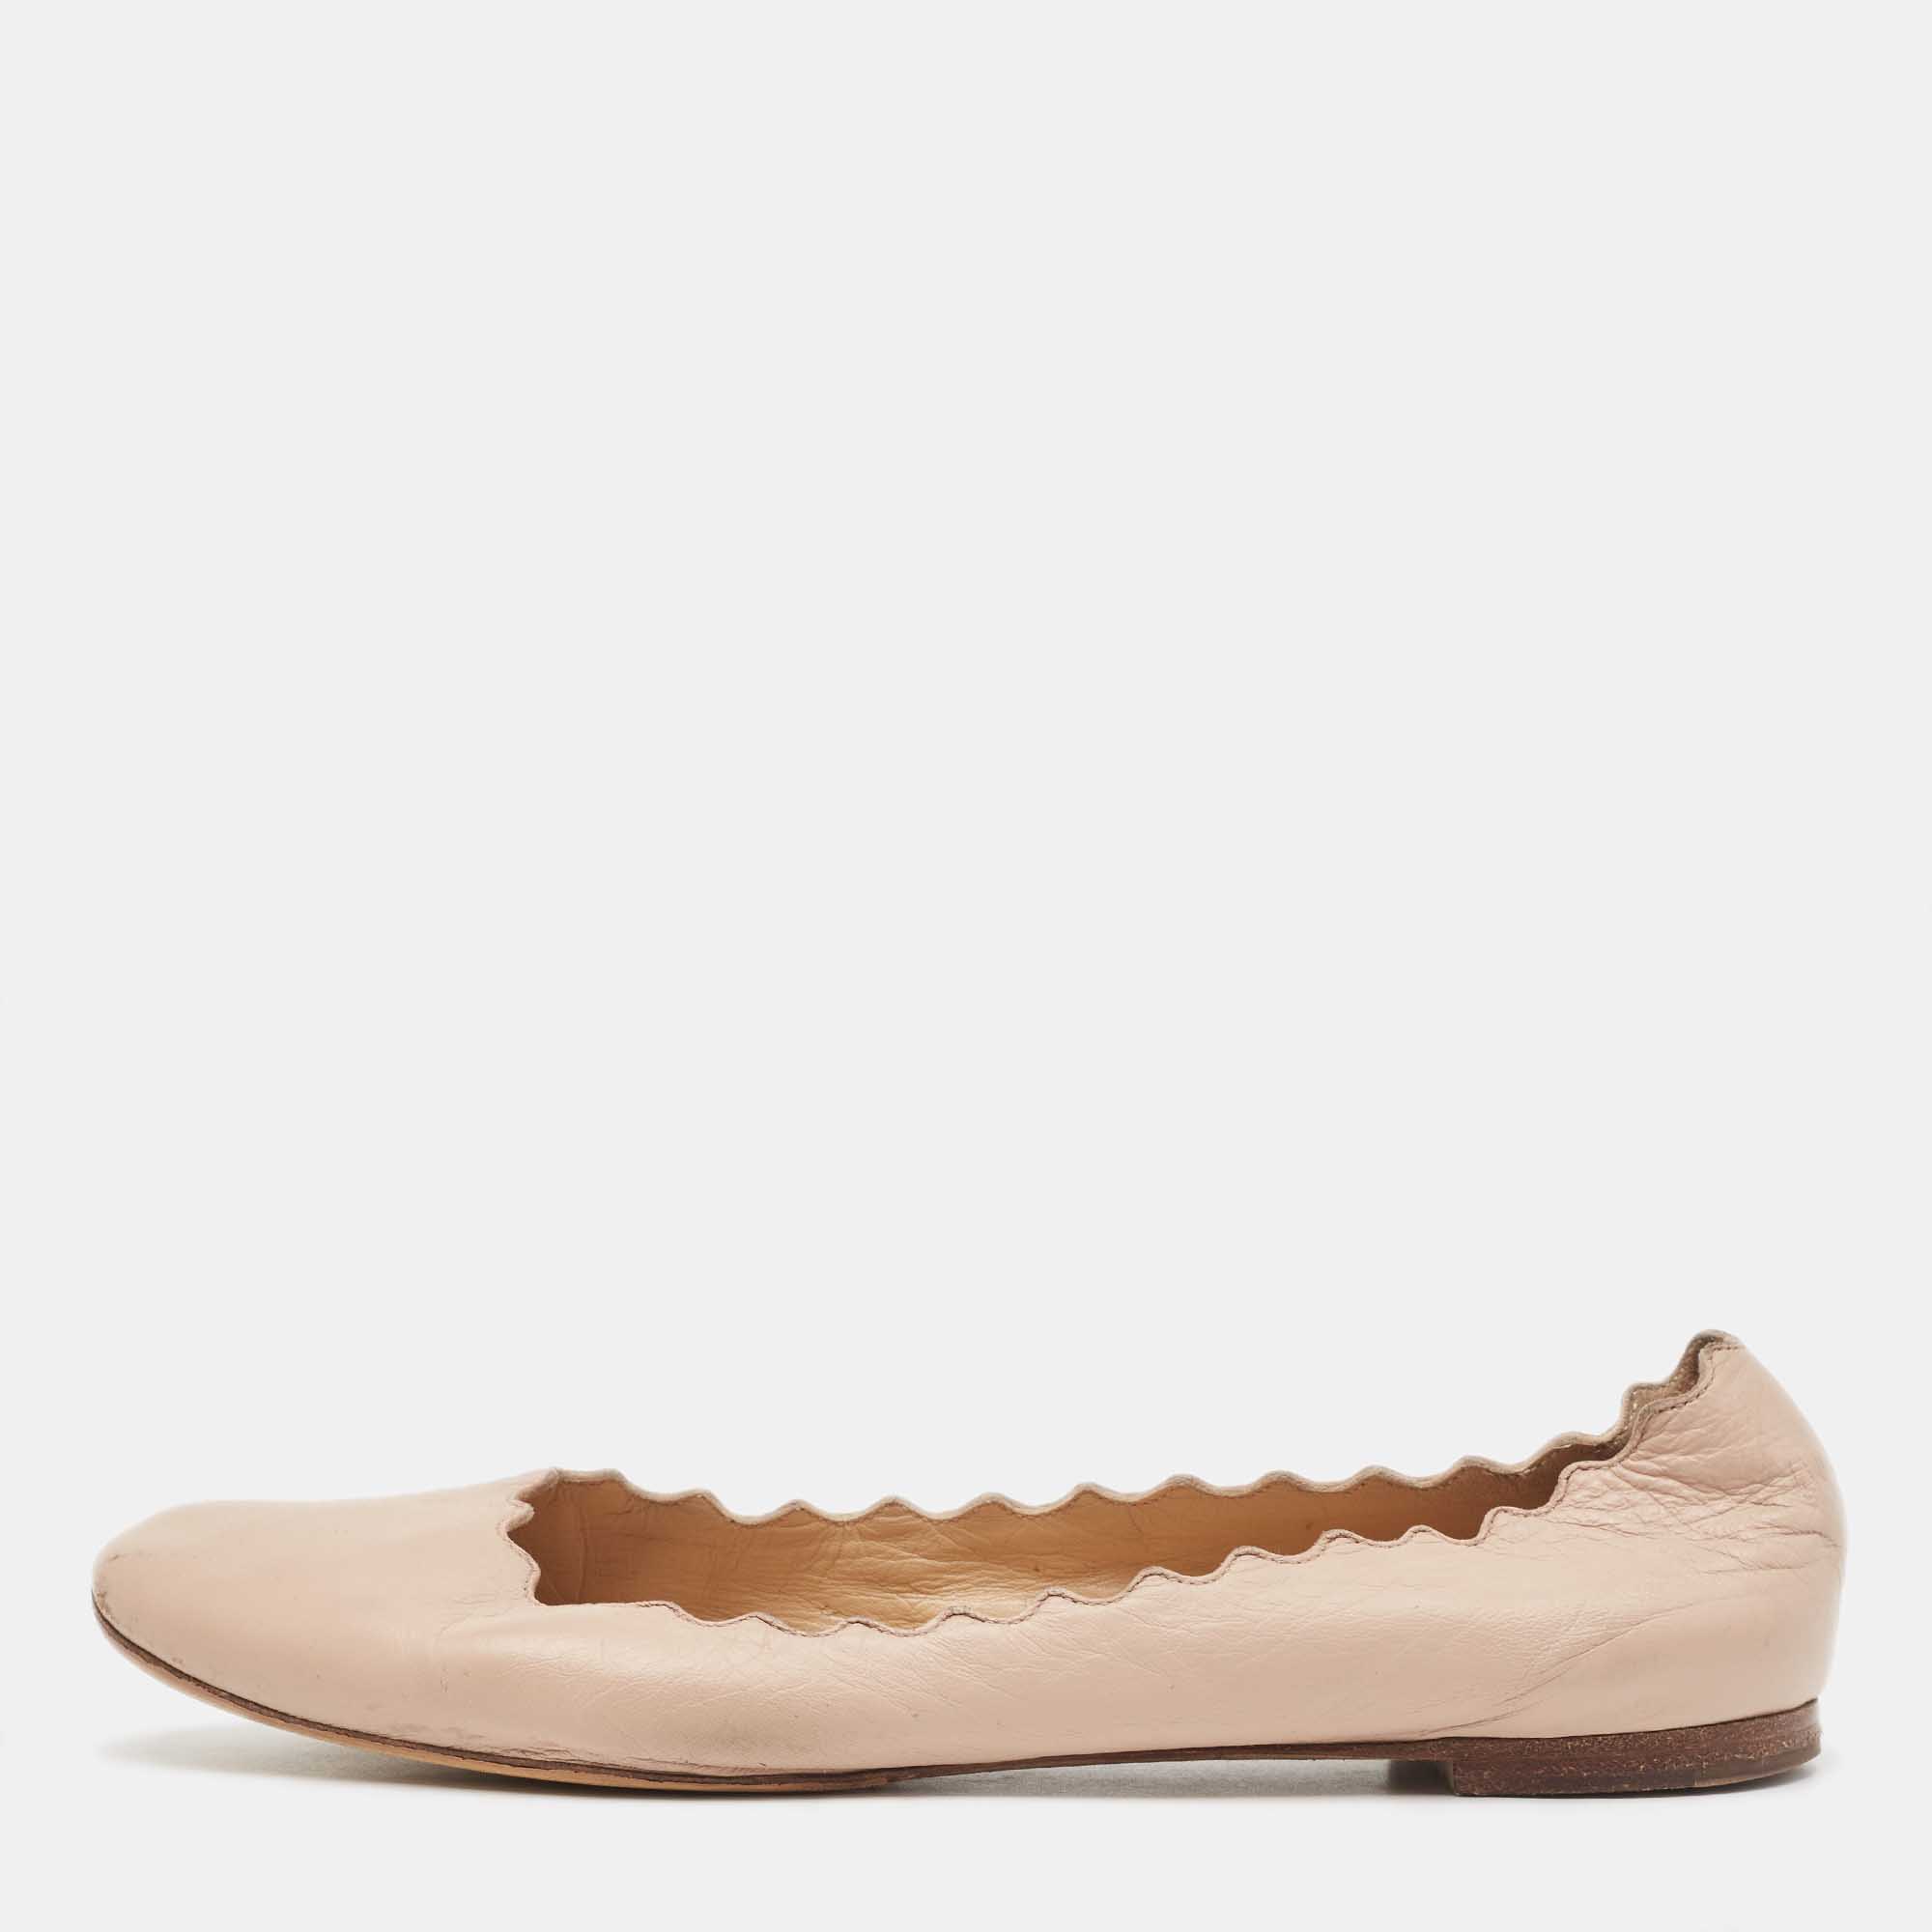 Pre-owned Chloé Beige Leather Laurena Scalloped Ballet Flats Size 38.5